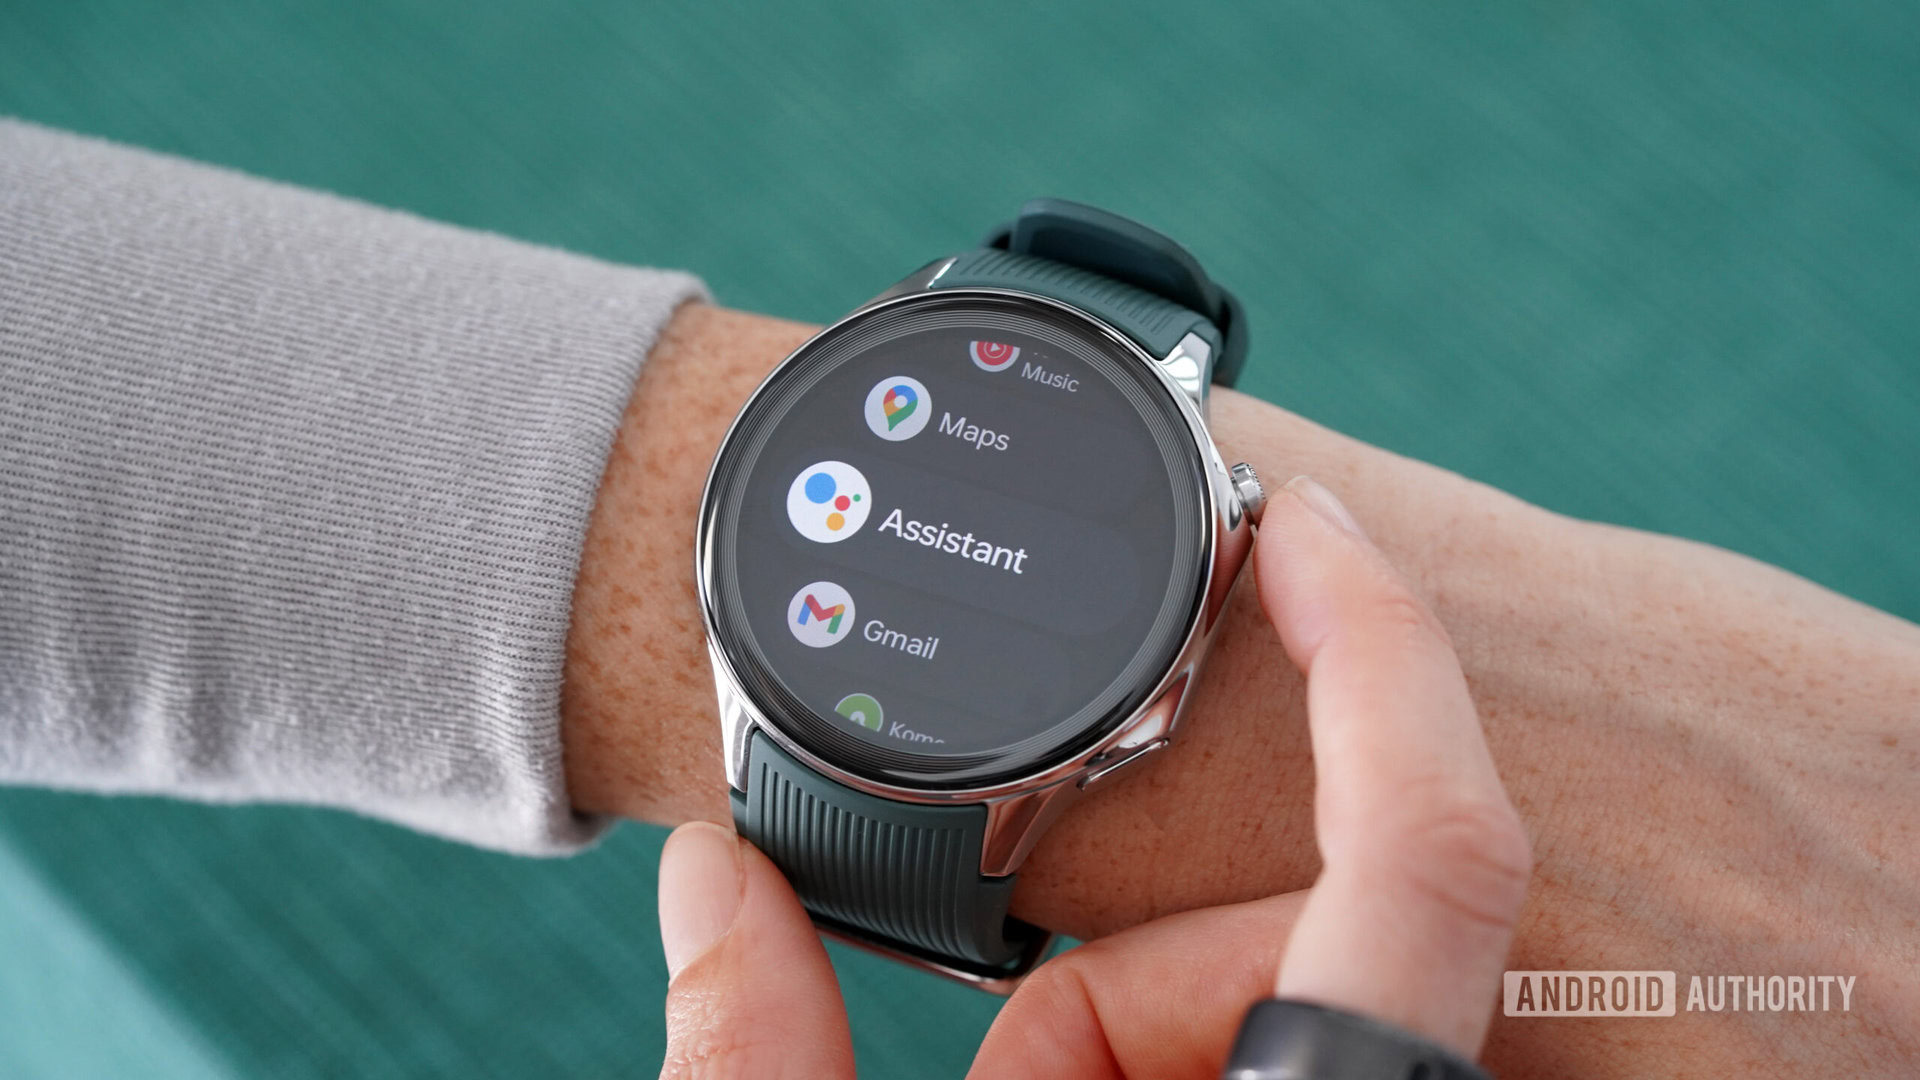 A user reviews some of the Google apps available on their OnePlus Watch 2.